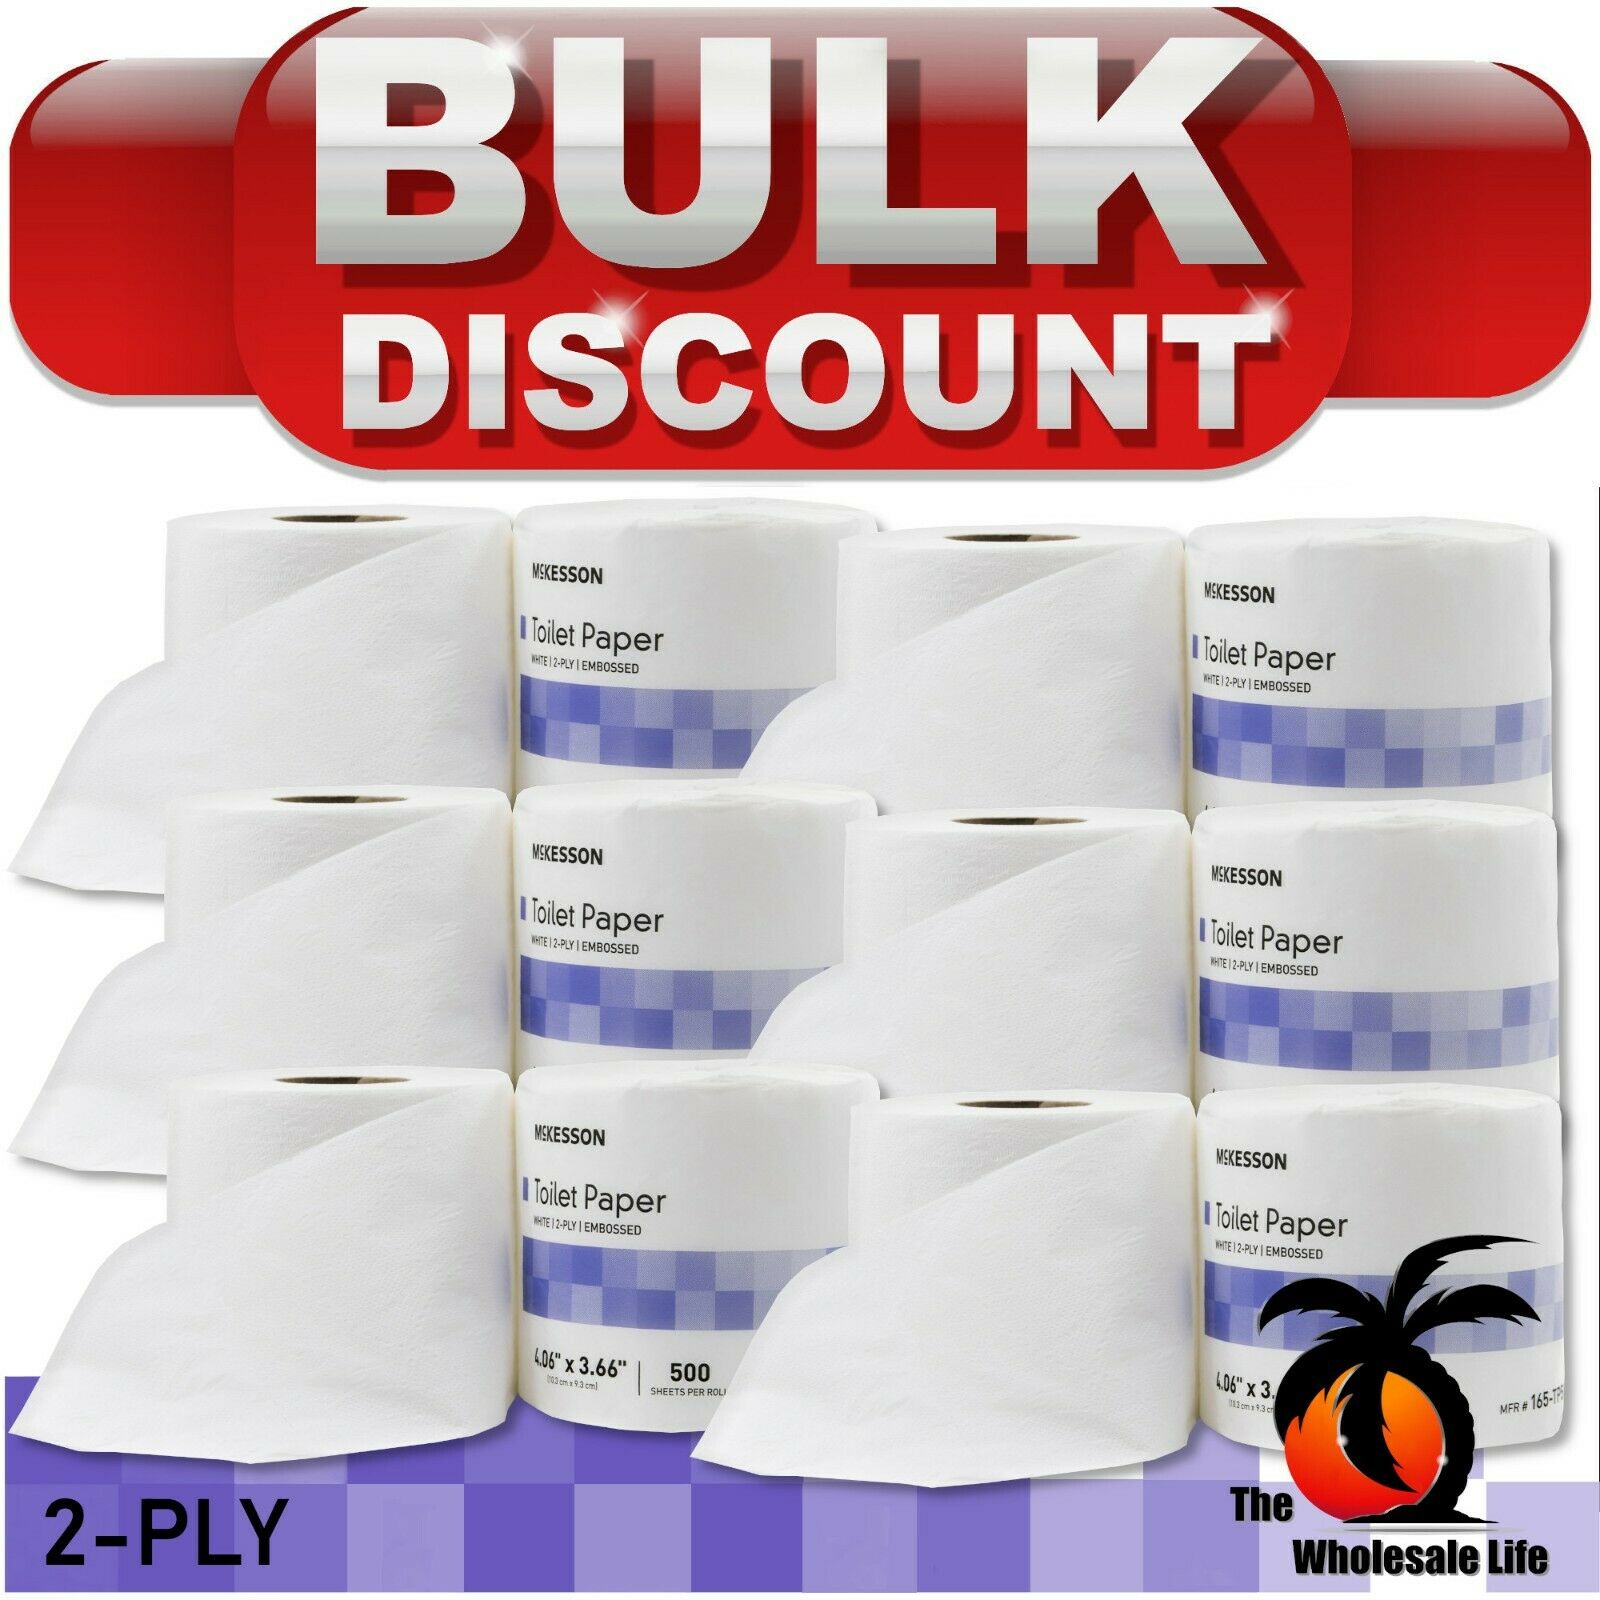 15 Rolls - Toilet Paper, White 2-ply Tissue, 500 Sheets, Standard Size Roll